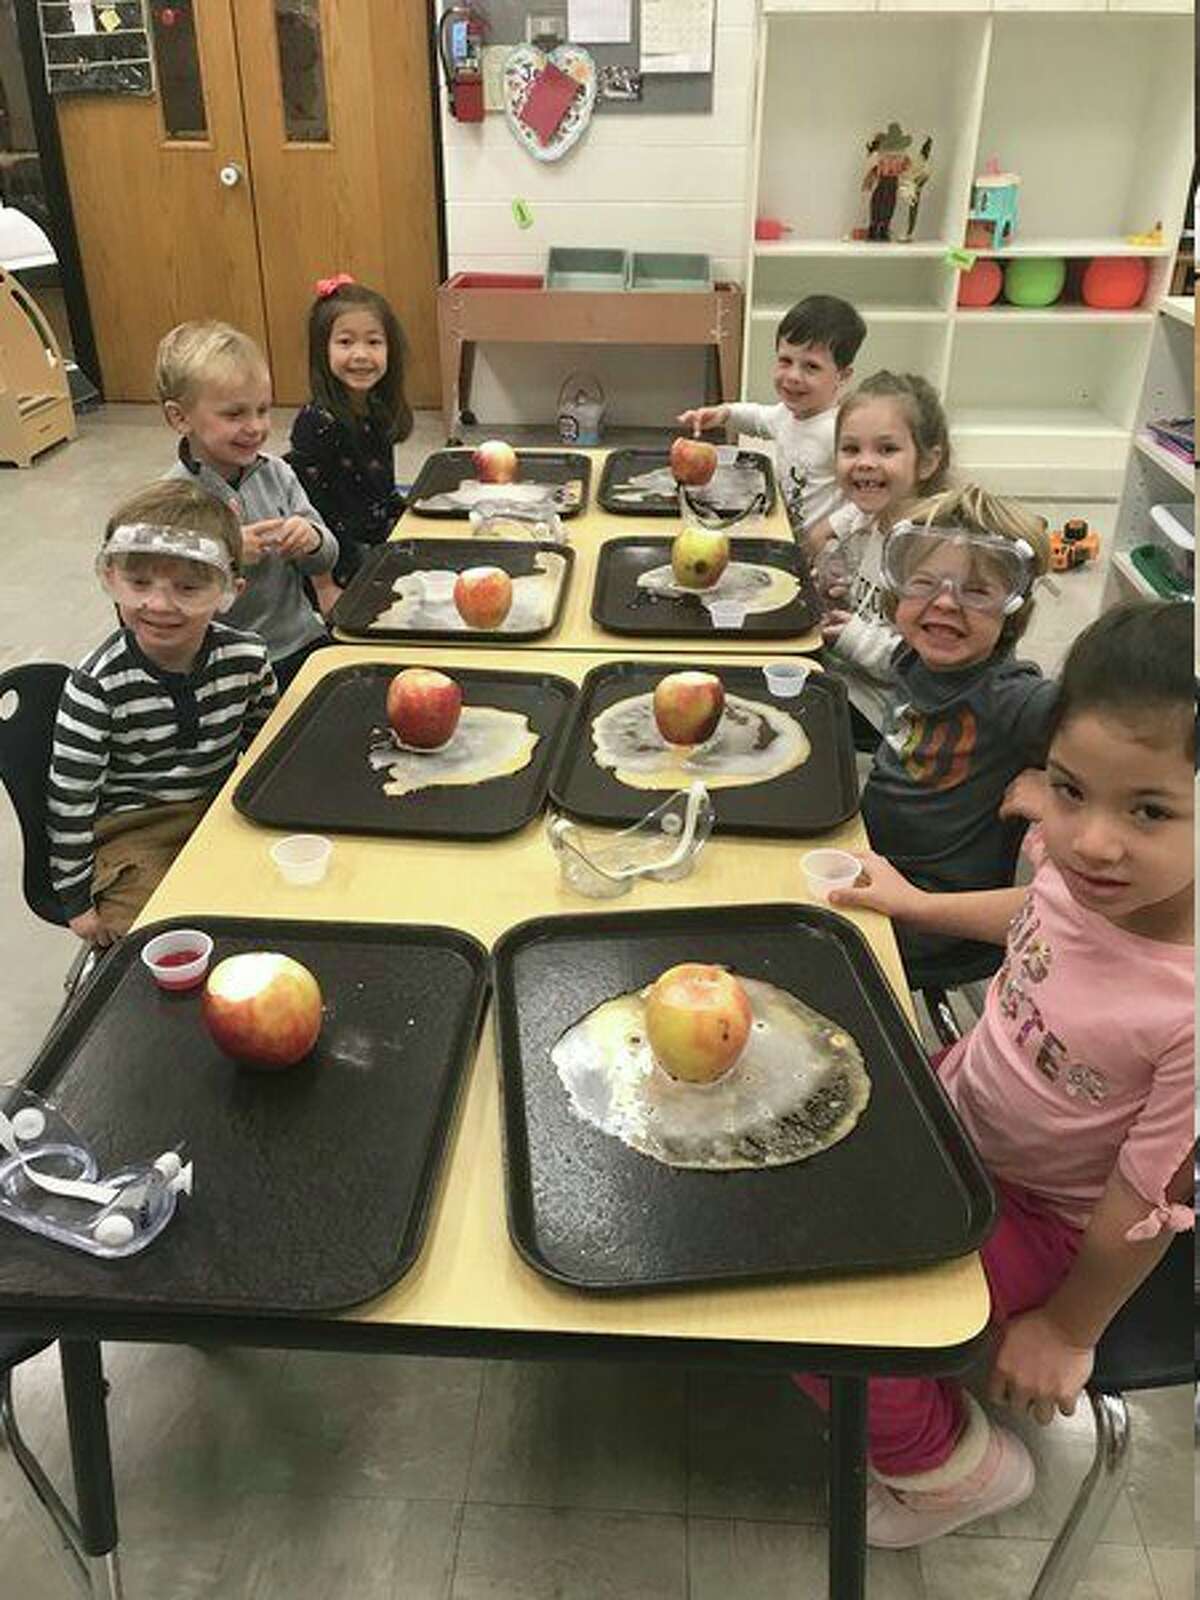 Students were all smiles as they proudly show off their apple volcanoes.